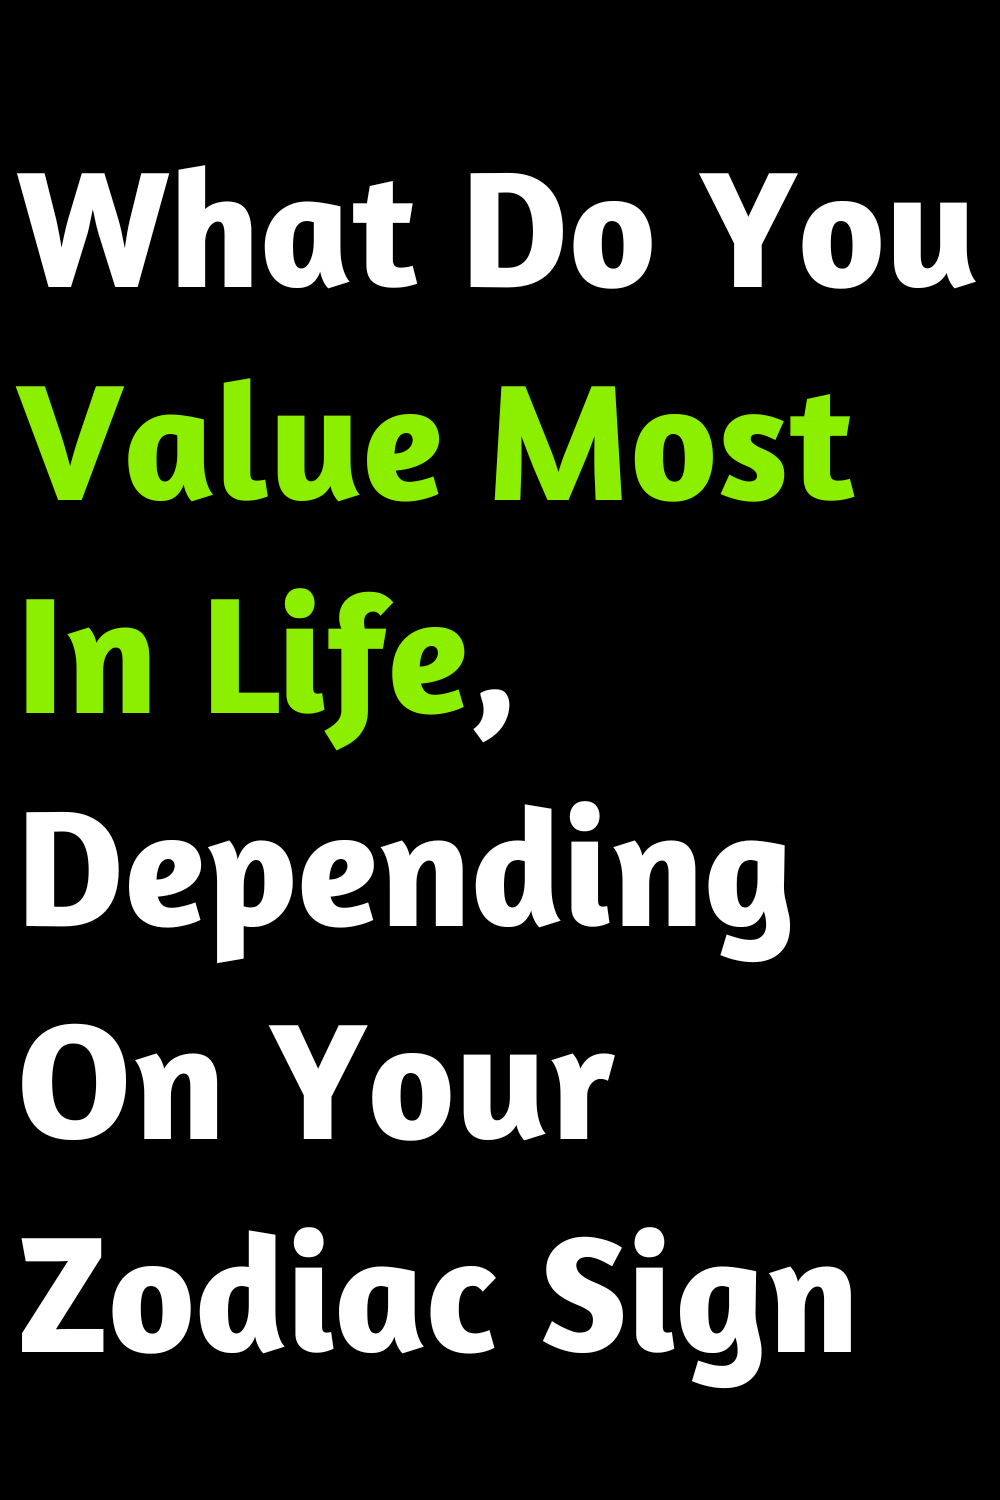 What Do You Value Most In Life, Depending On Your Zodiac Sign